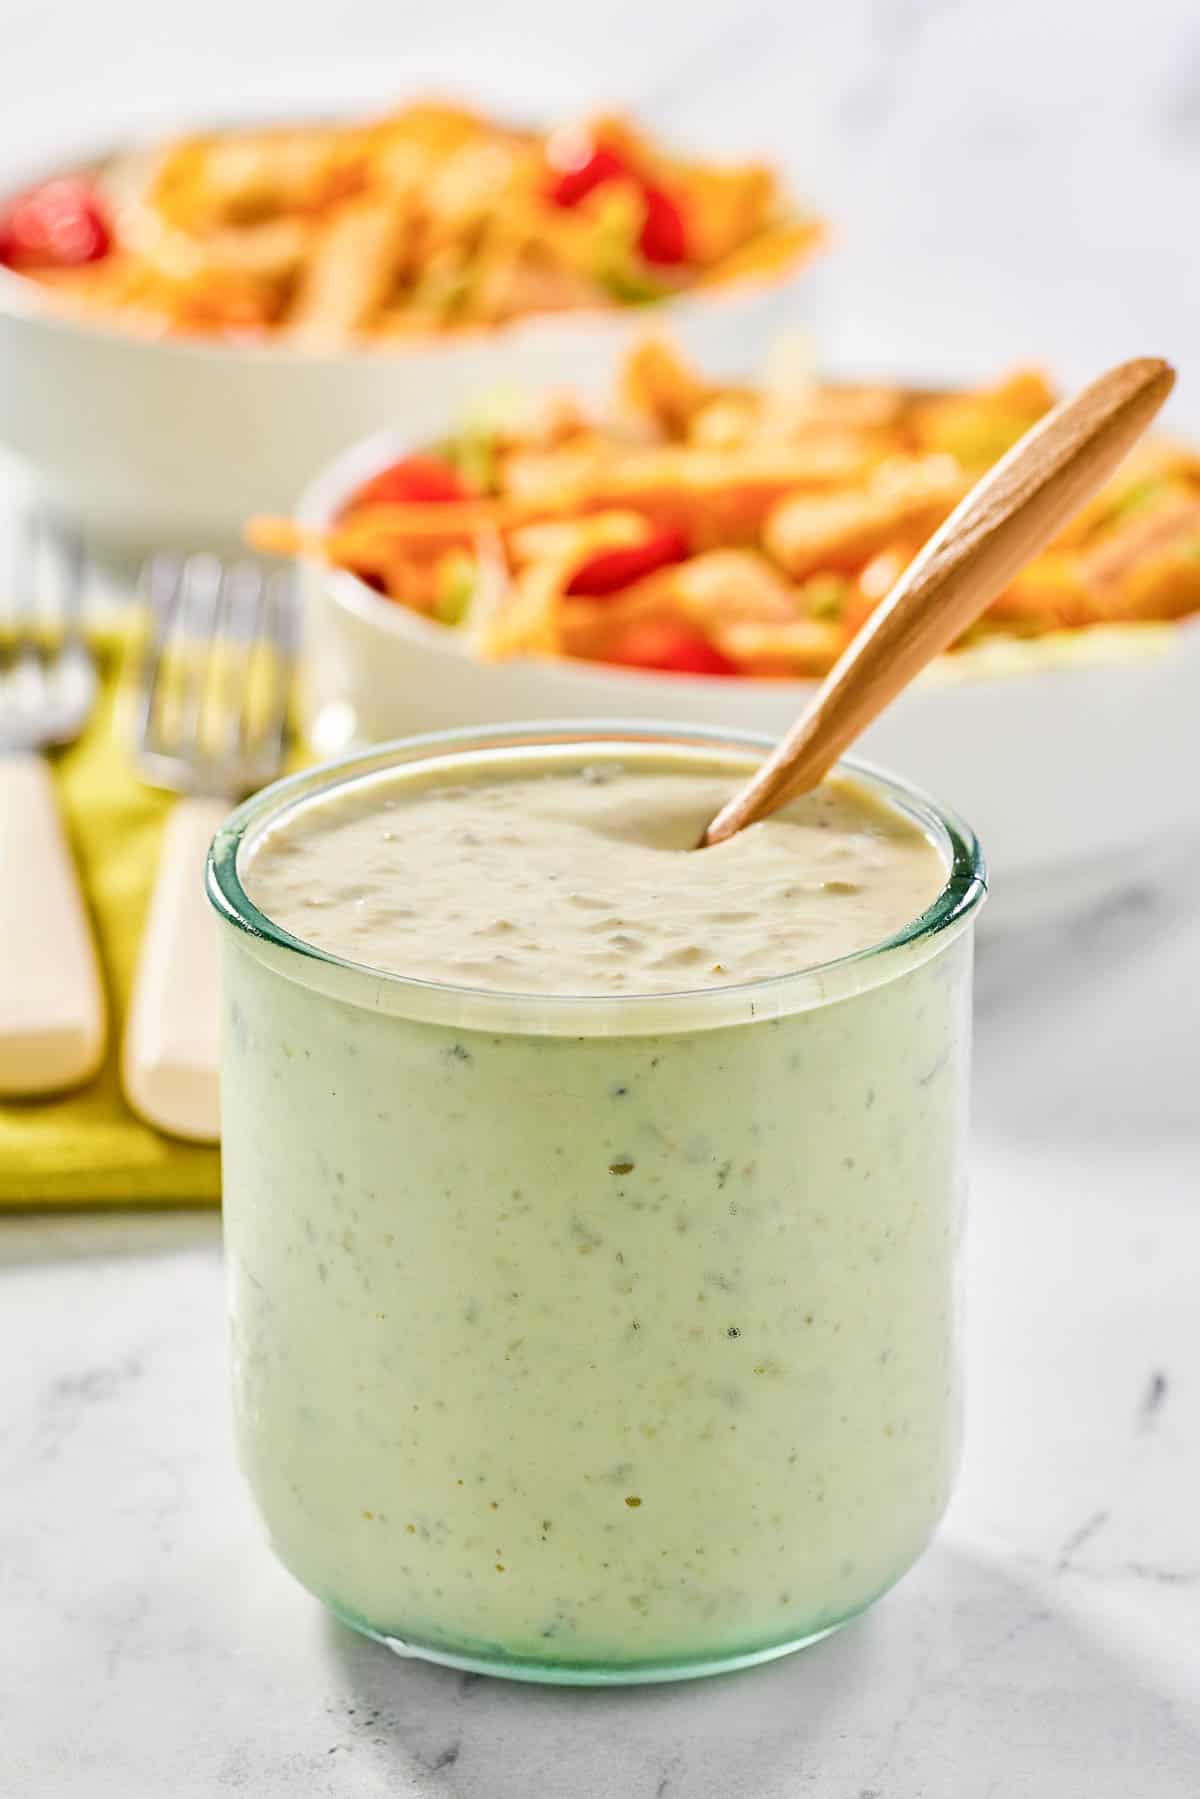 Homemade jalapeno ranch dressing a jar and two salads behind it.